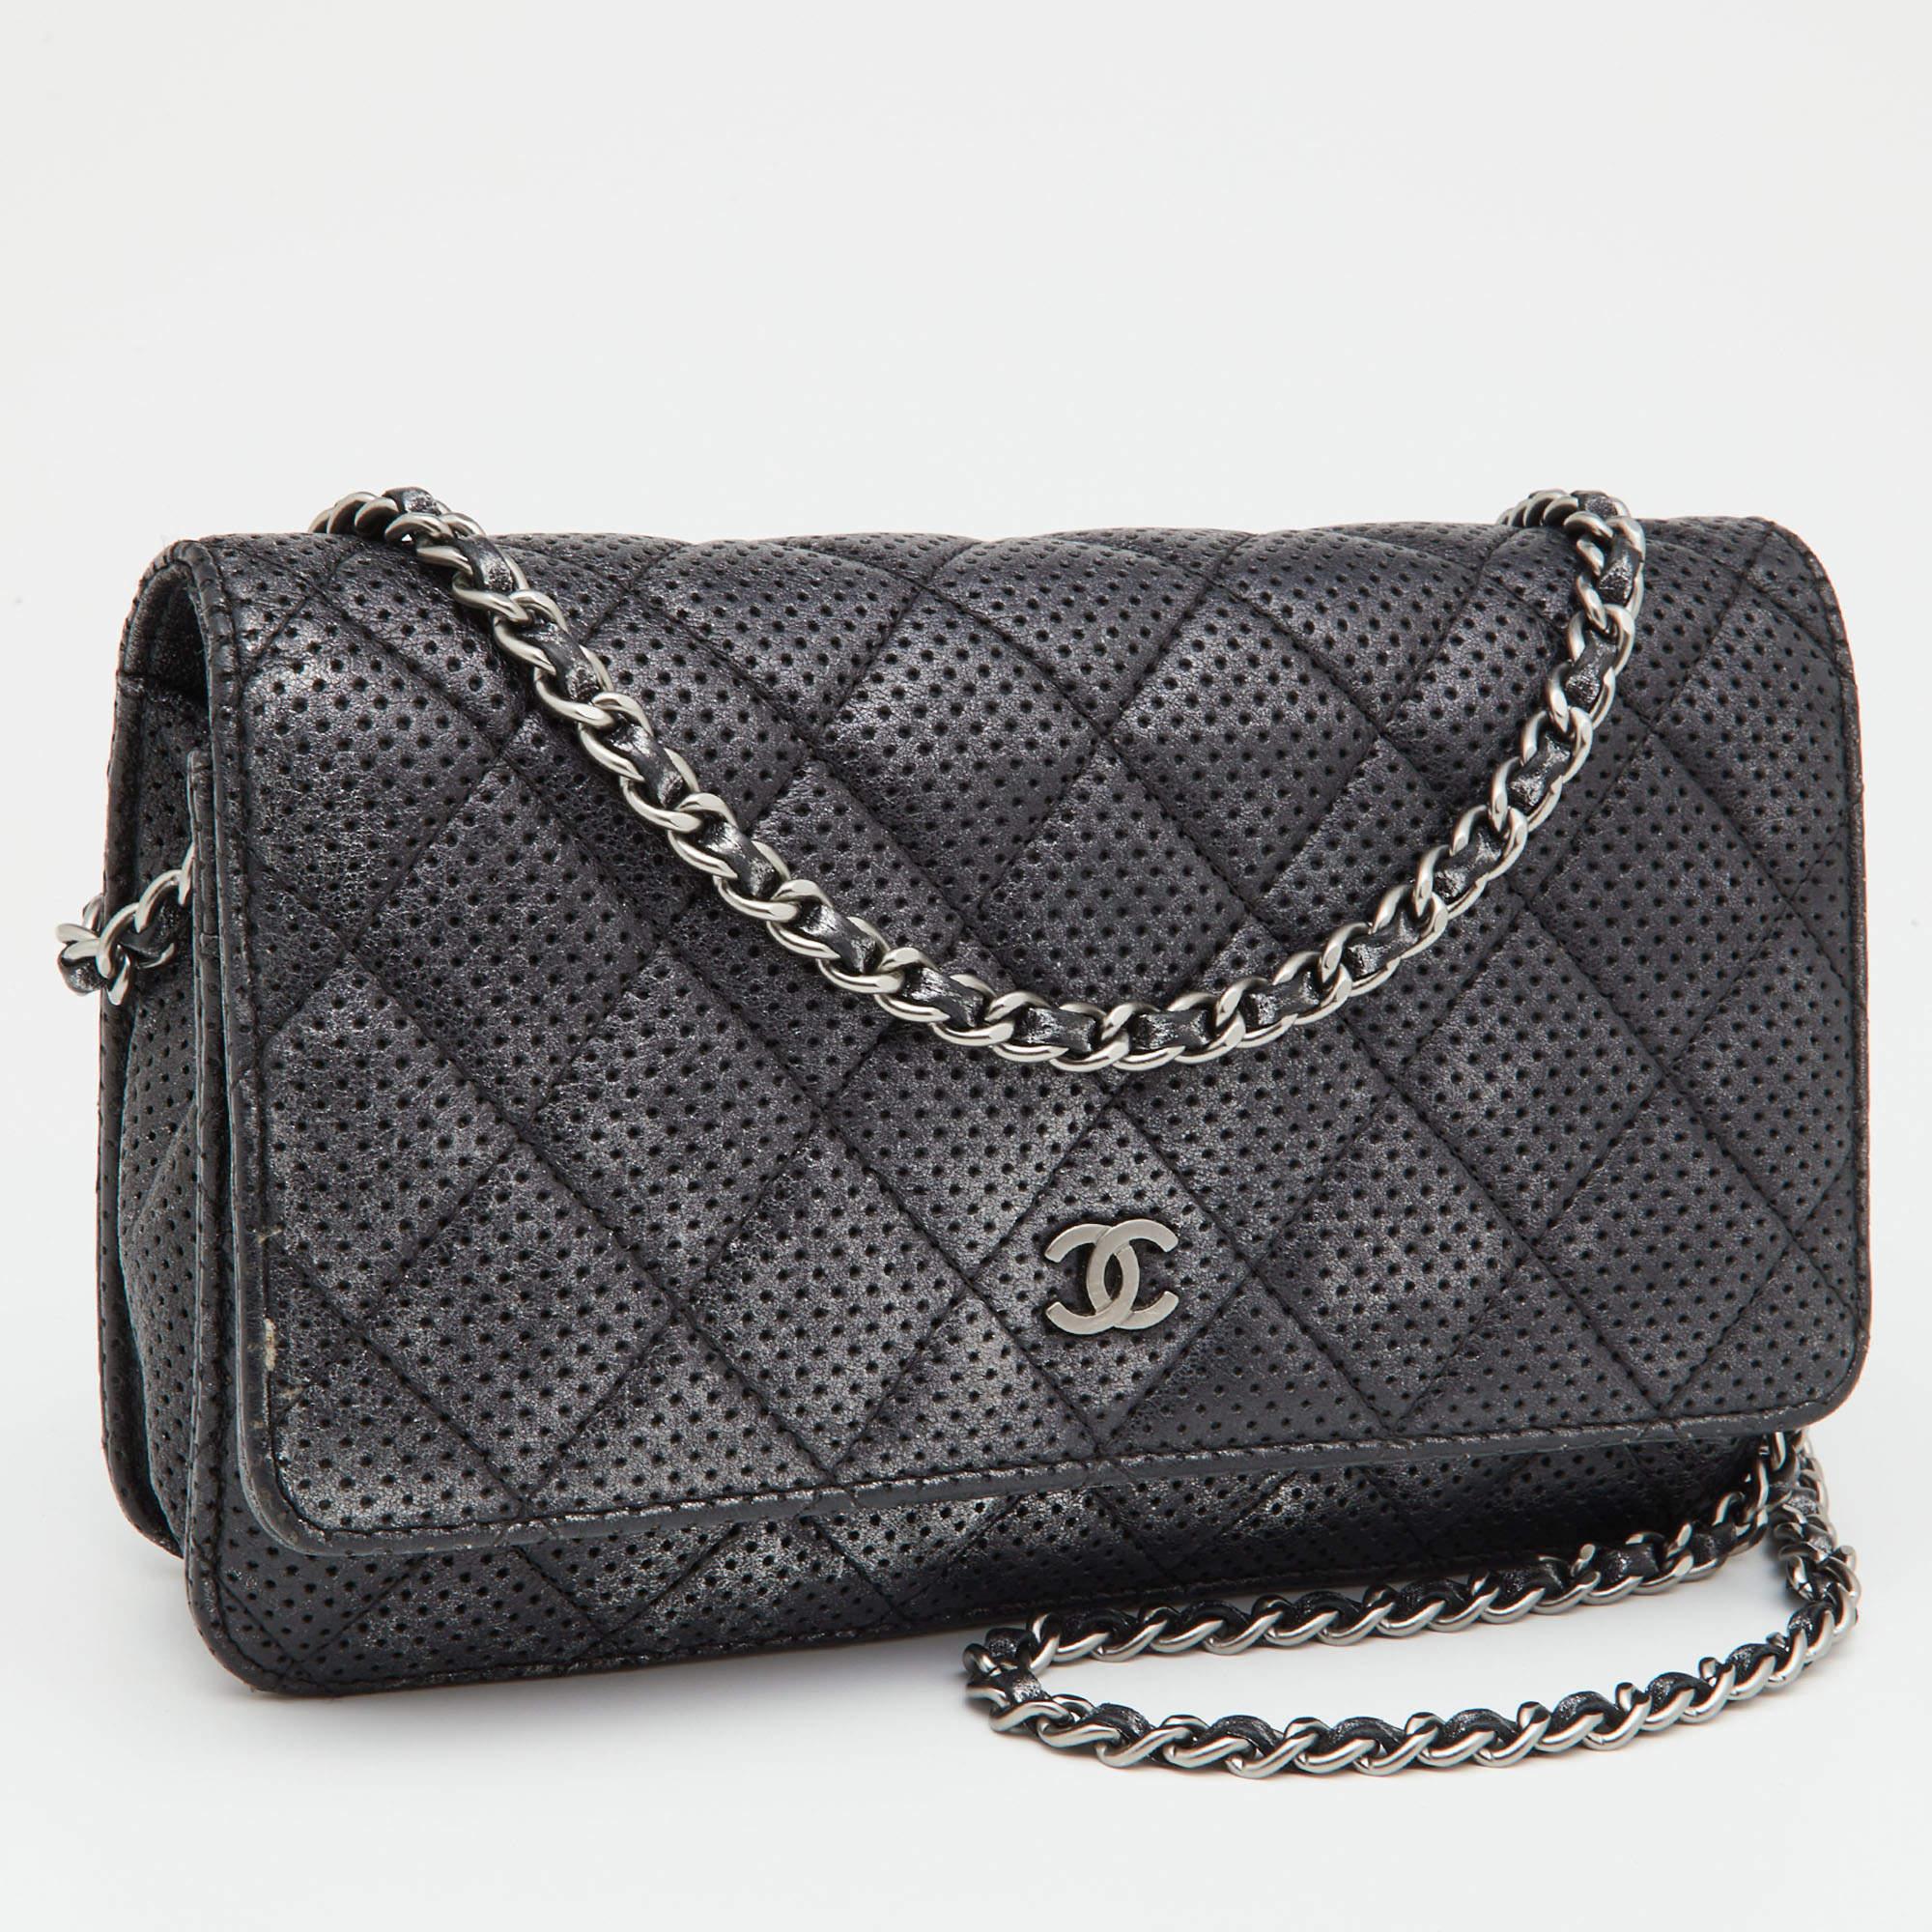 Women's Chanel Black/Silver Quilted Perforated Leather Classic Wallet on Chain